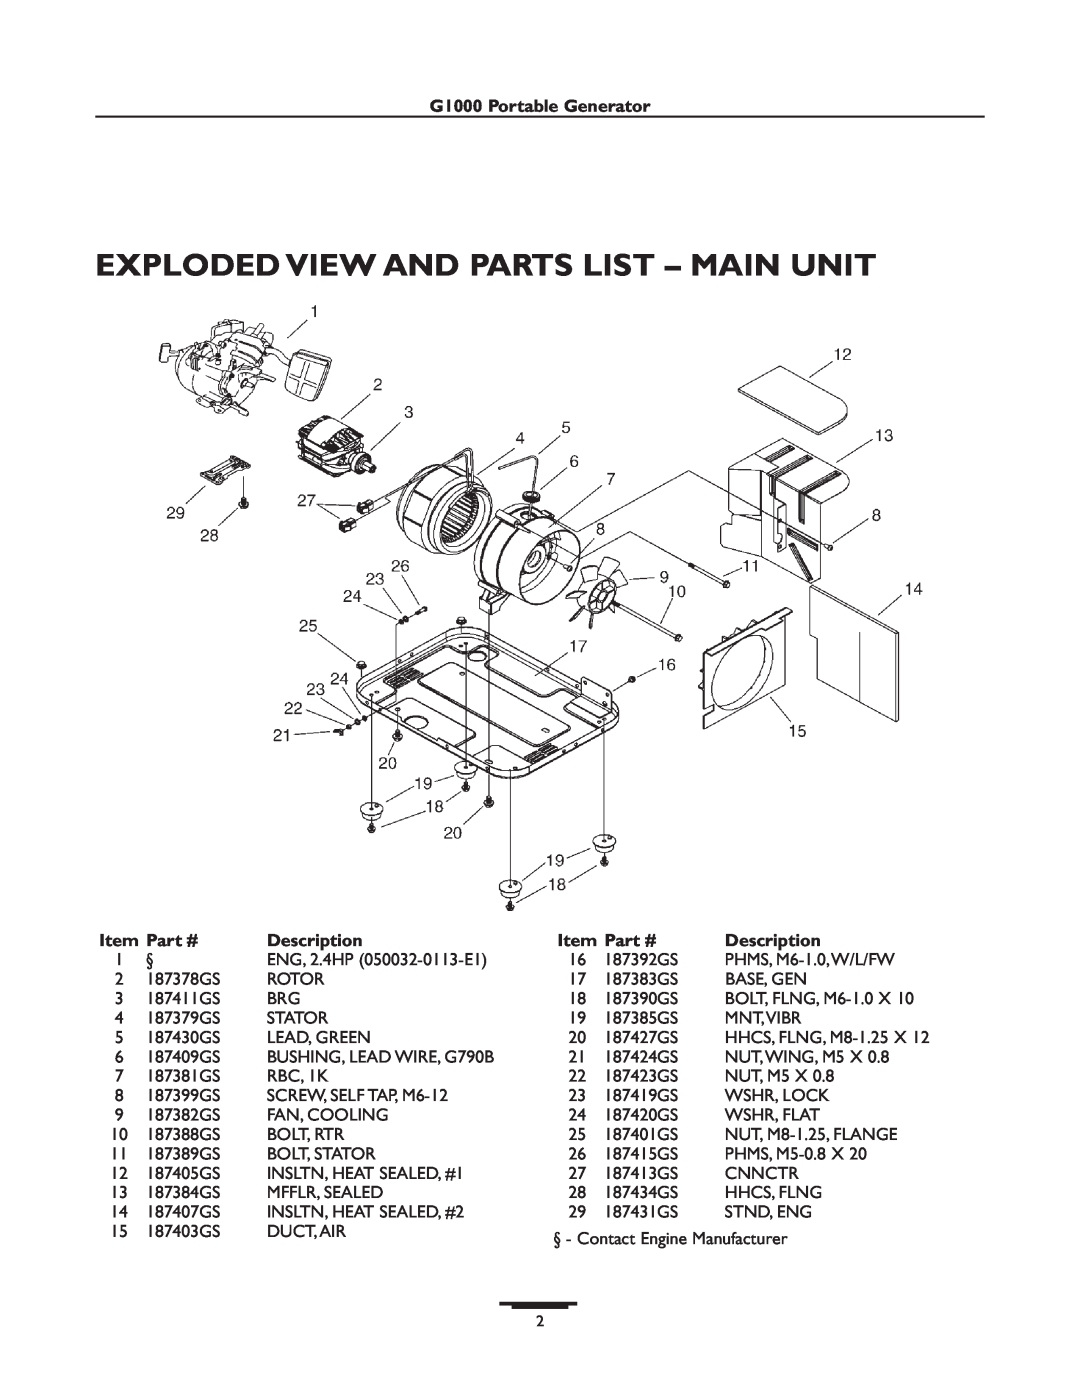 Snapper 01666-1 manual Exploded View And Parts List - Main Unit, G1000 Portable Generator, Description 